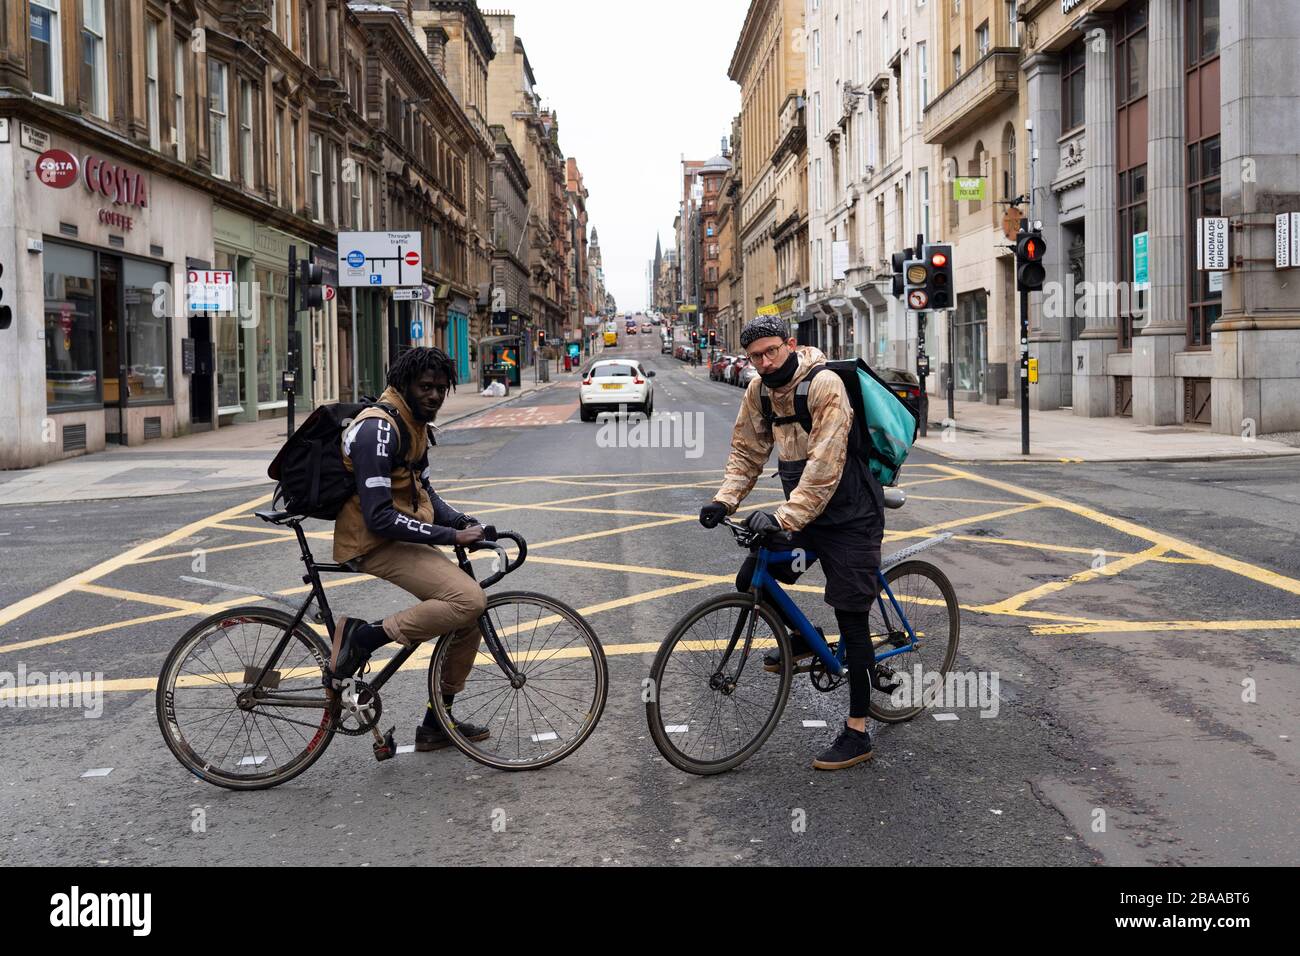 Glasgow, Scotland, UK. 26 March, 2020. Views from city centre in Glasgow on Thursday during the third day of the Government sanctioned Covid-19 lockdown. The city is largely deserted. Only food and convenience stores open. Pictured; Two Deliveroo delivery cyclists pause for a portrait .Iain Masterton/Alamy Live News Stock Photo